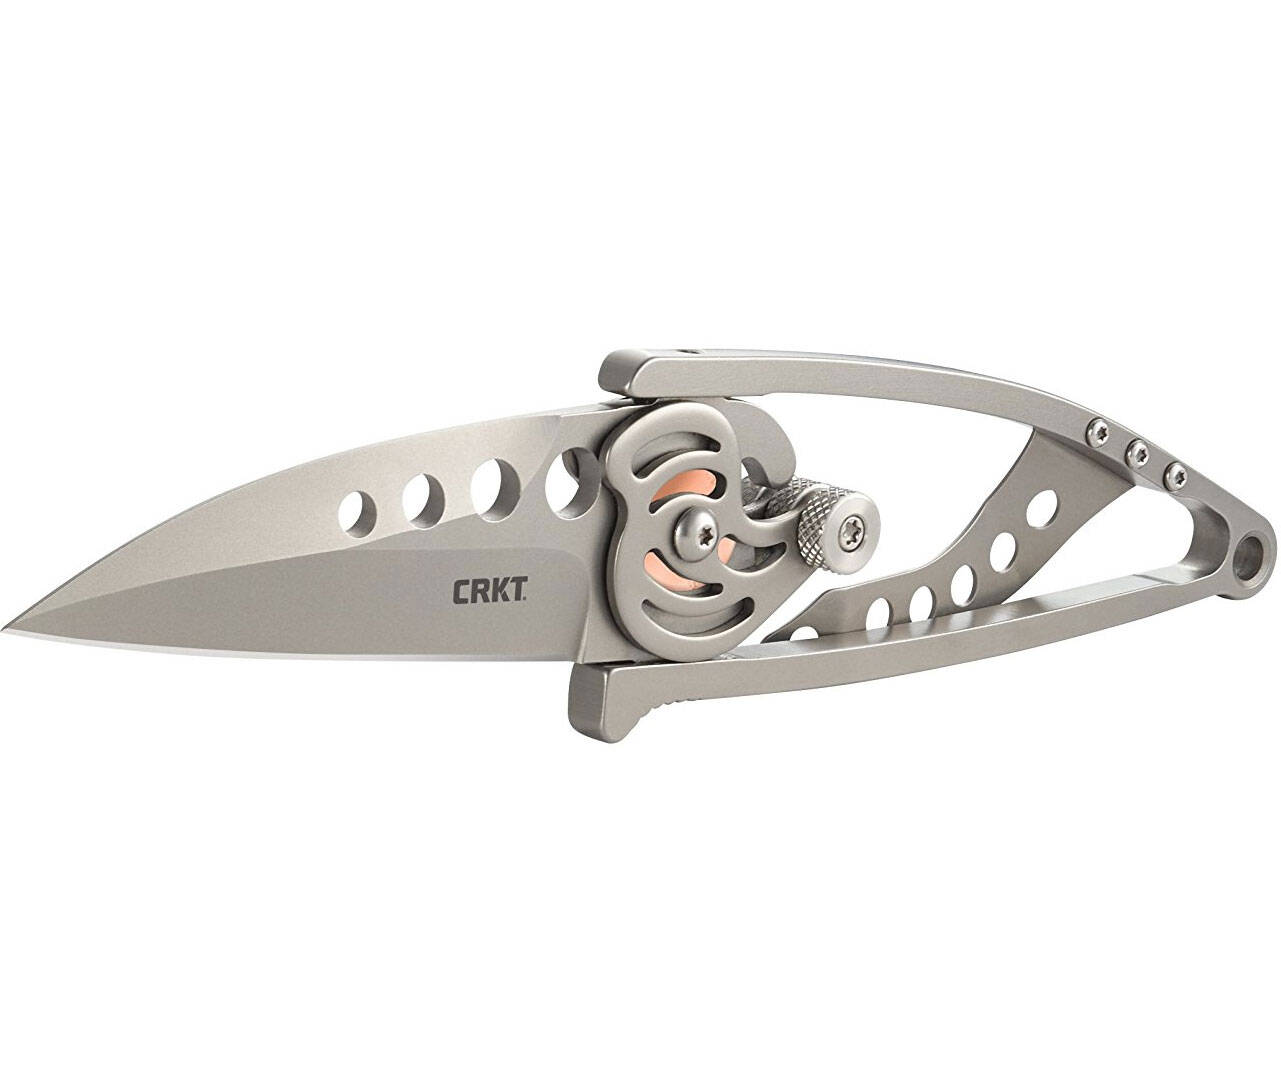 CRKT Snap Lock Folding Knife - coolthings.us